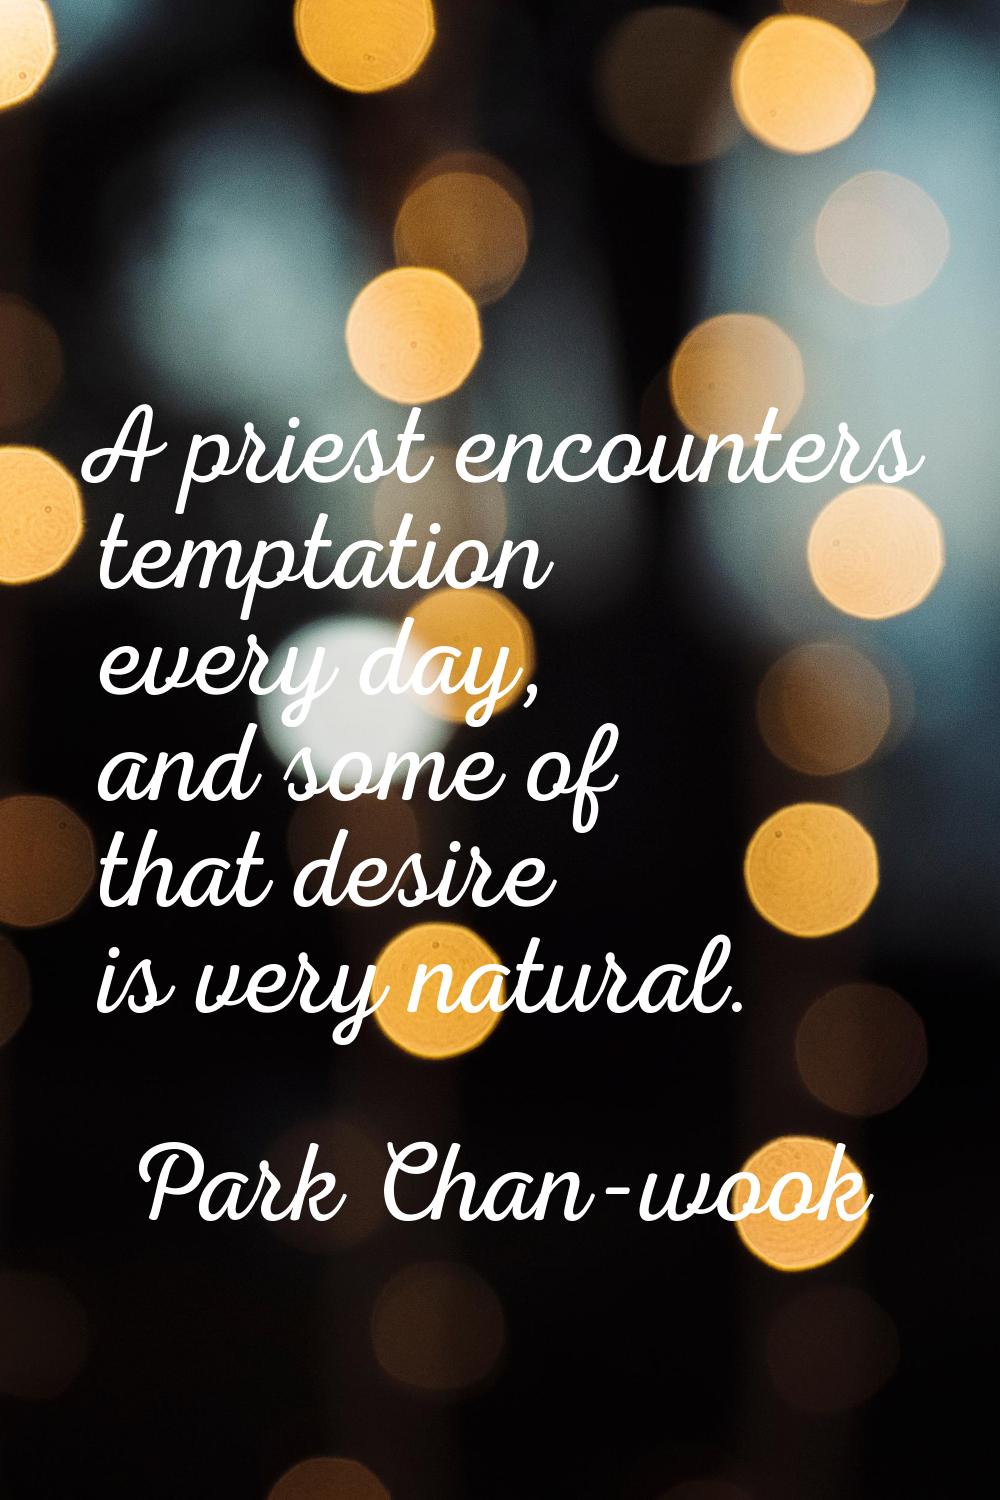 A priest encounters temptation every day, and some of that desire is very natural.